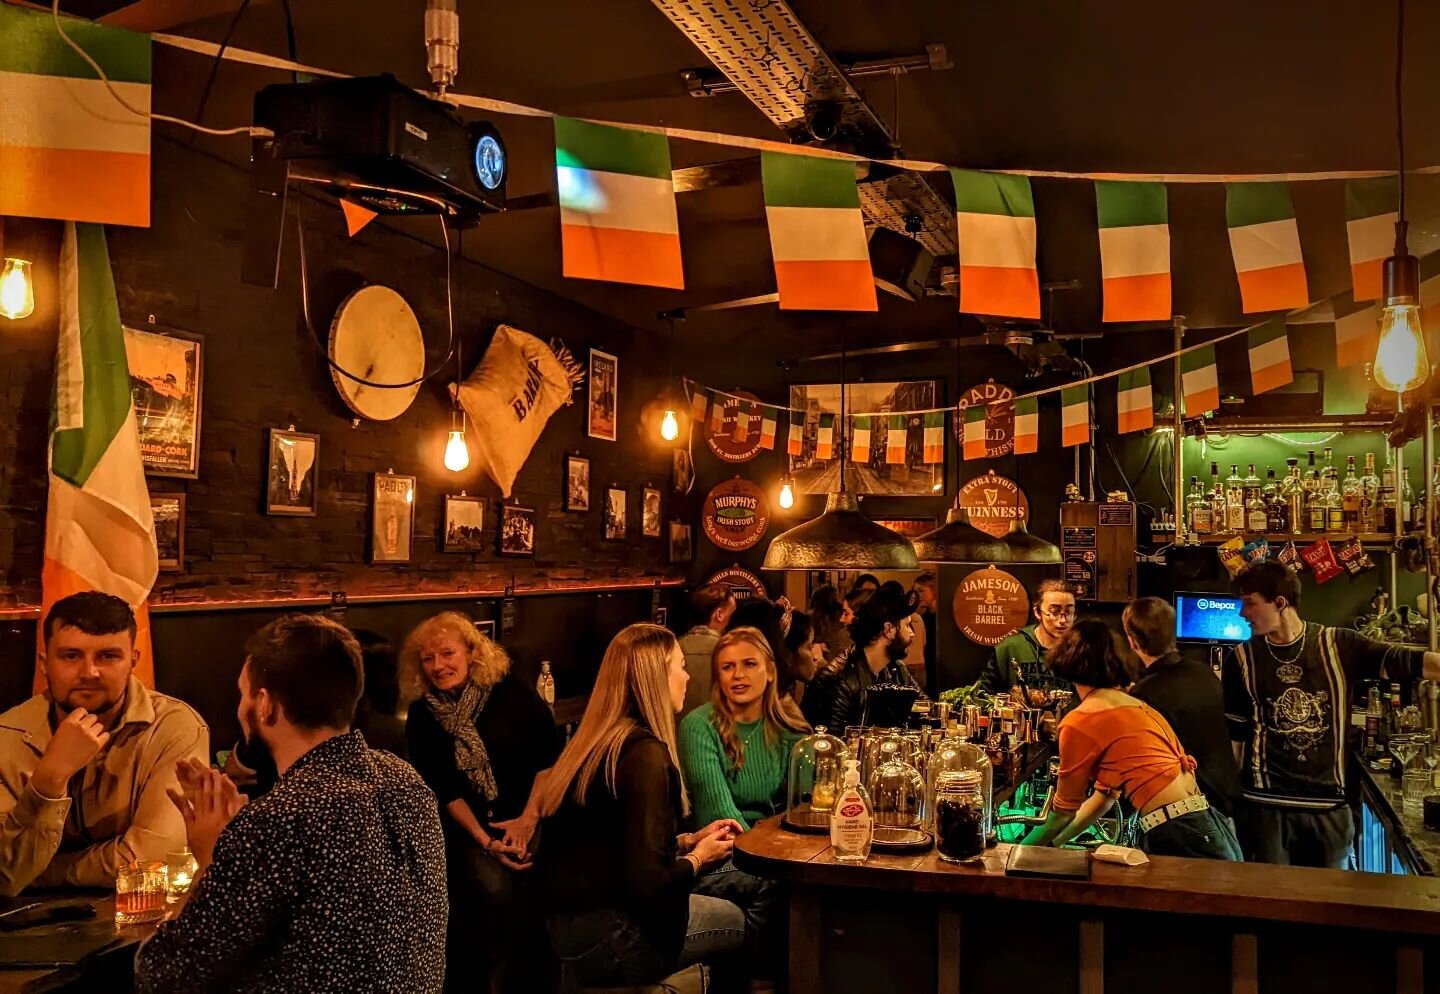 Happy St.Patrick's Day from all of us here at The Whiskey Tumbler! ☘️

We are in full swing and the celebrations don't stop here, we got it covered all weekend so don't miss out! 

Walk-in guests welcome!